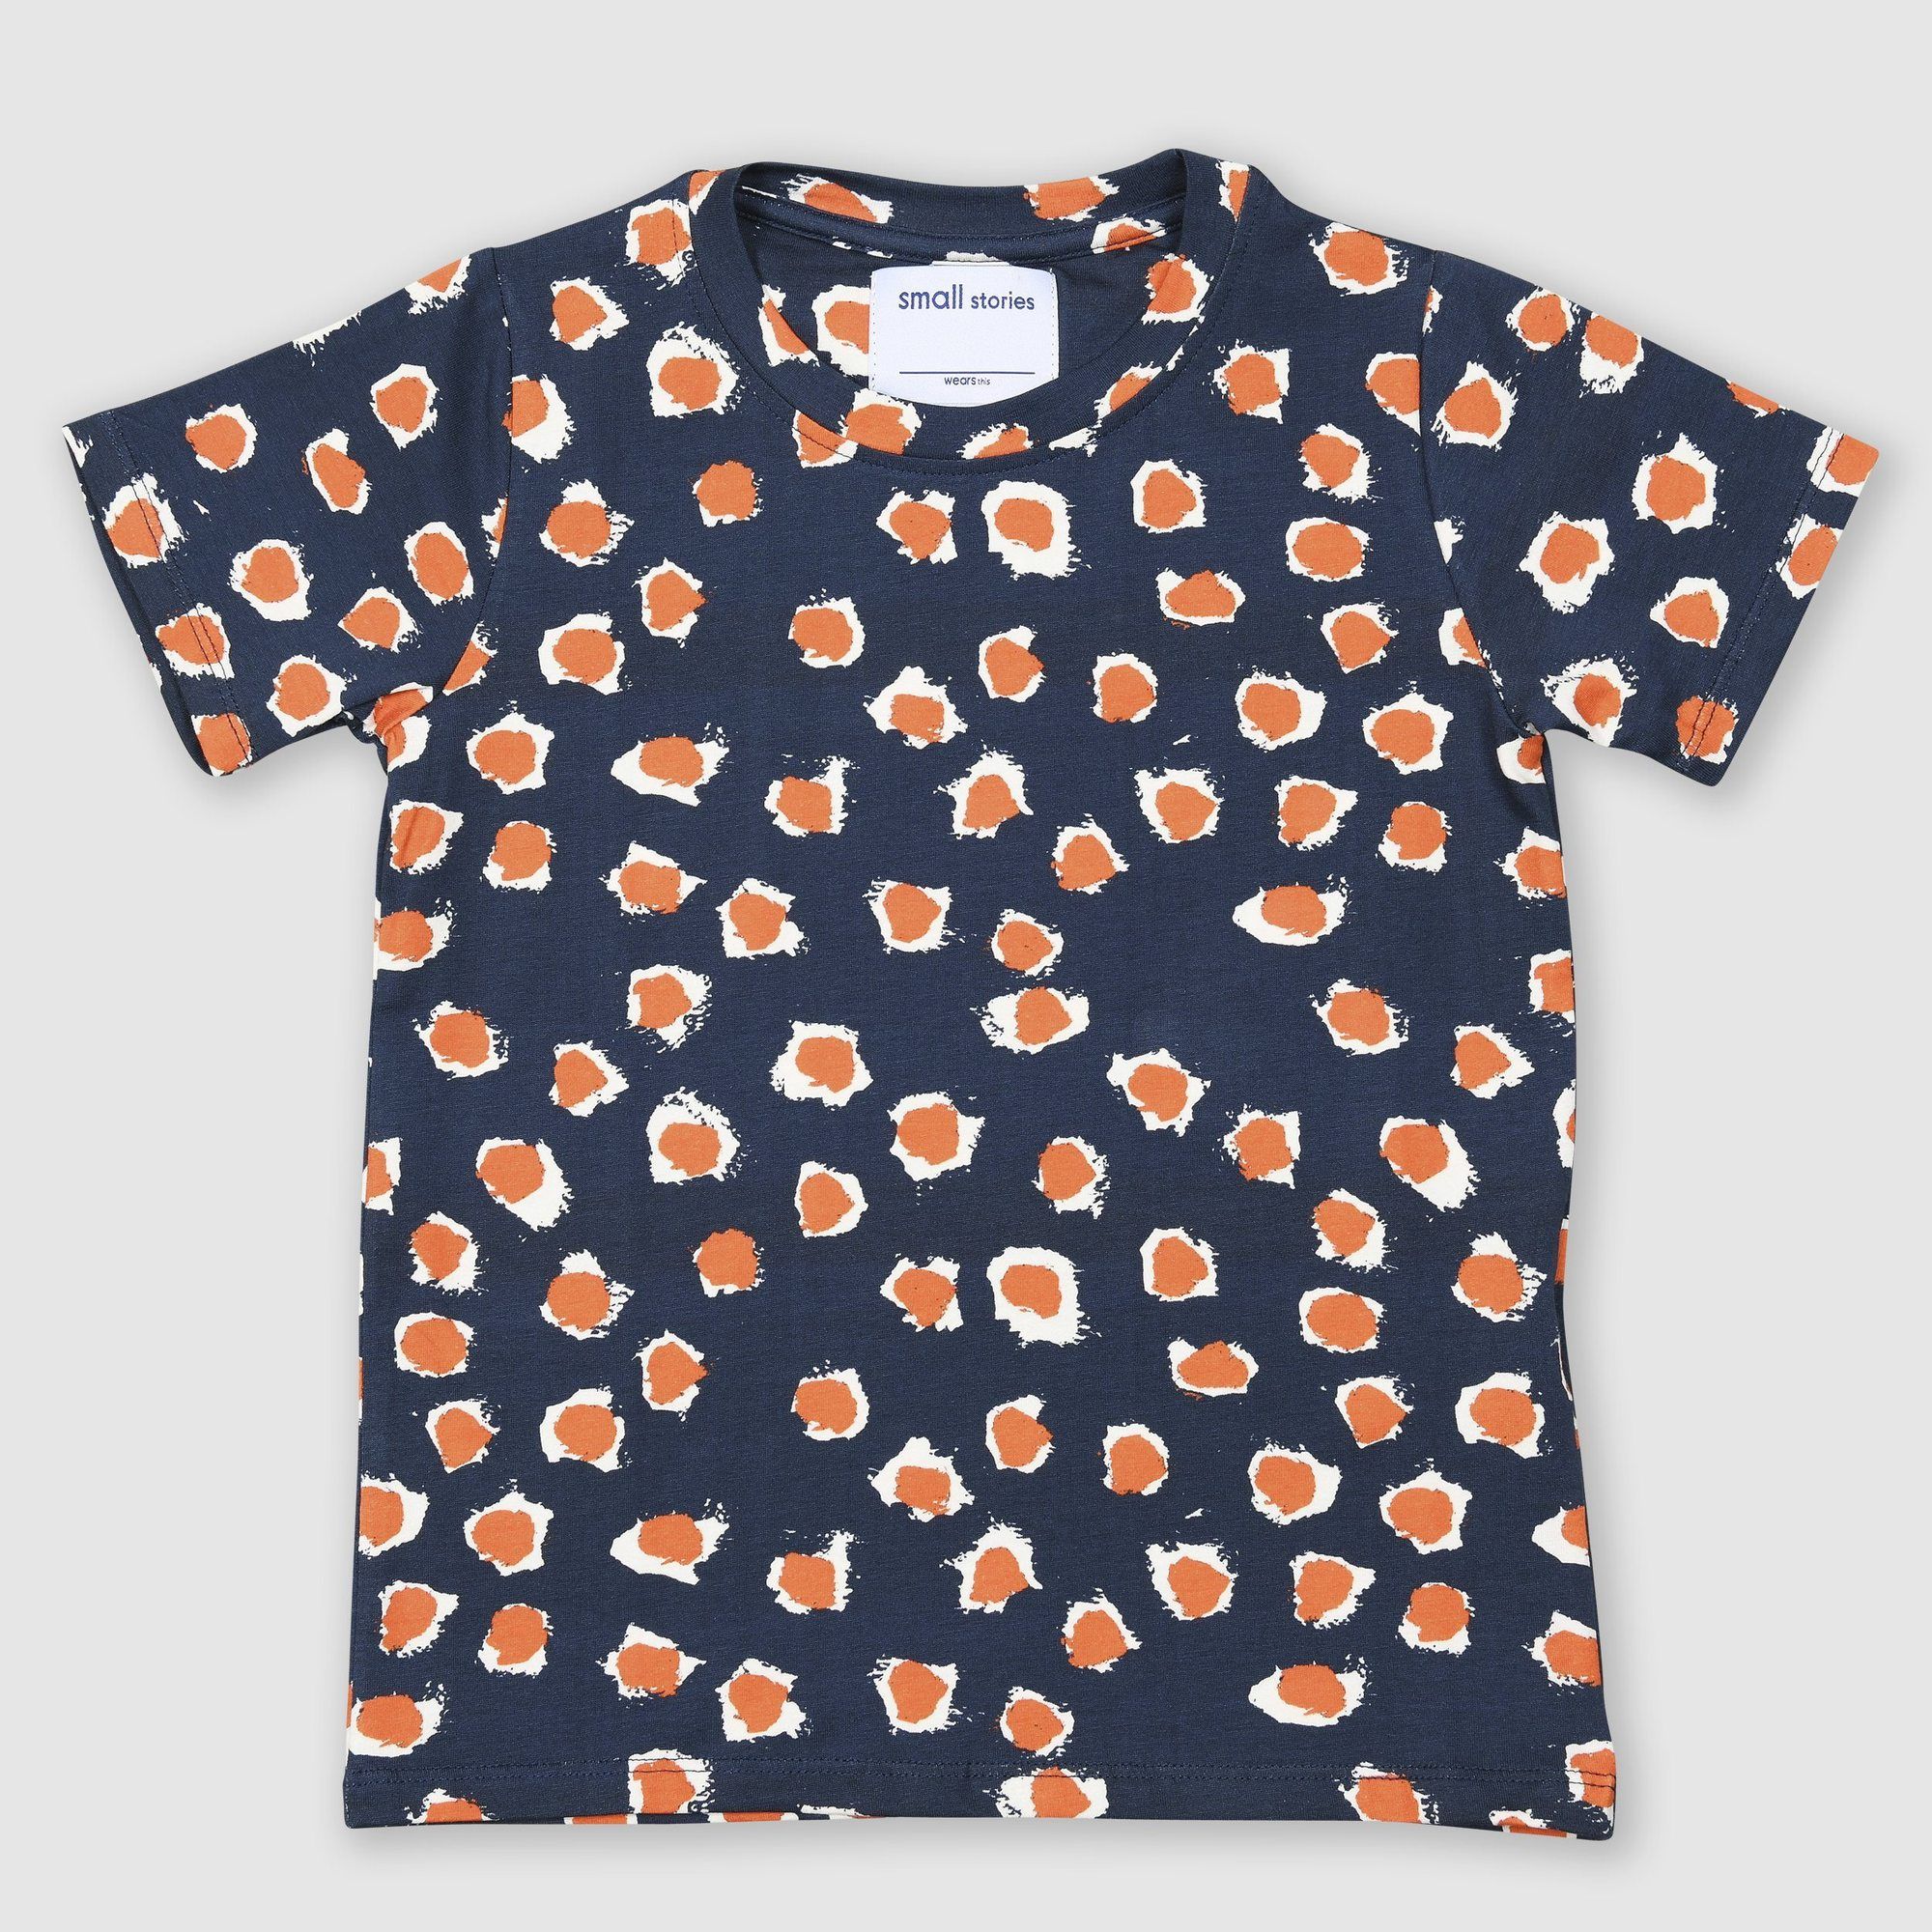 Short sleeve tee featuring our bespoke painted dot print in blue with orange and white dots. Made from super soft stretchy cotton. 